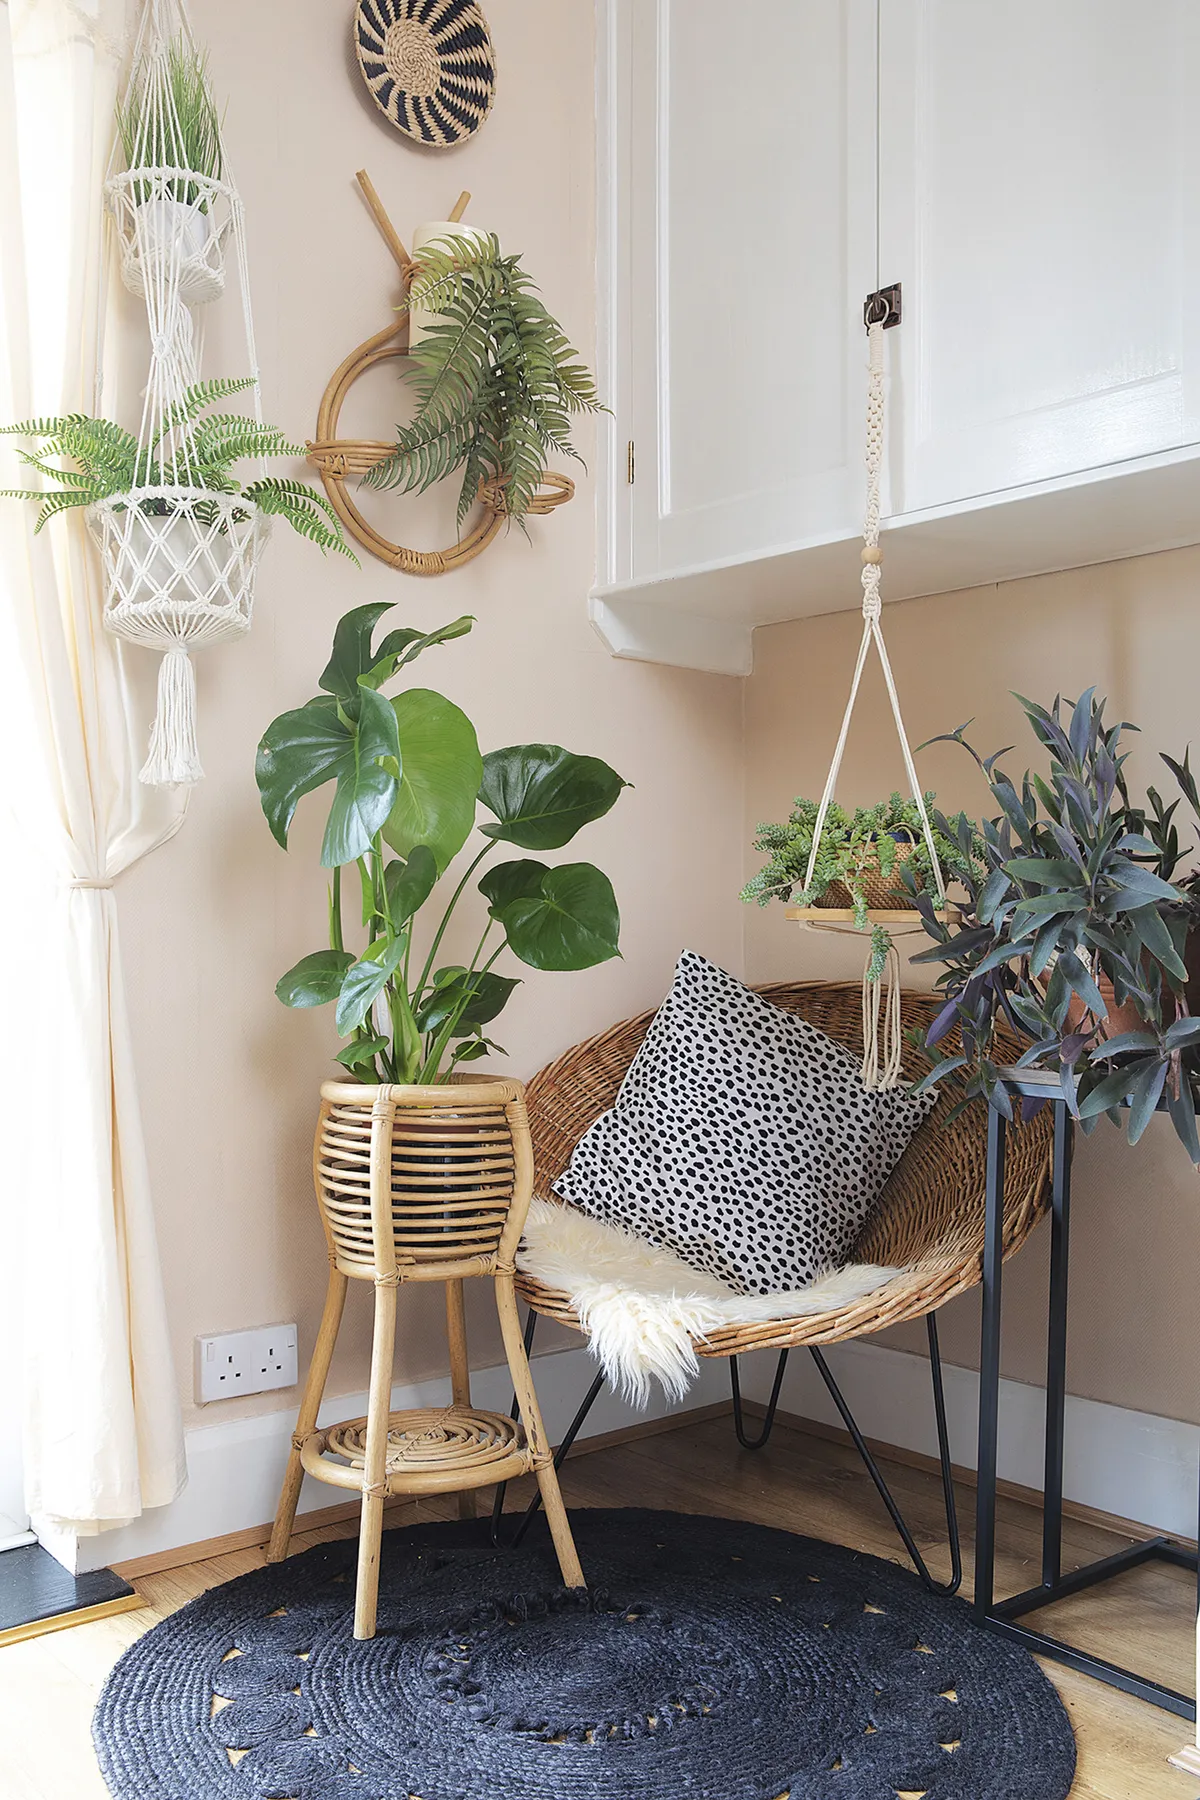 Leanne’s a big fan of plants and has them dotted around every room. ‘My mum made lots of the hanging planters during lockdown,’ she says. ‘I love the double one, which I got in Cornwall, as it’s quite unusual’